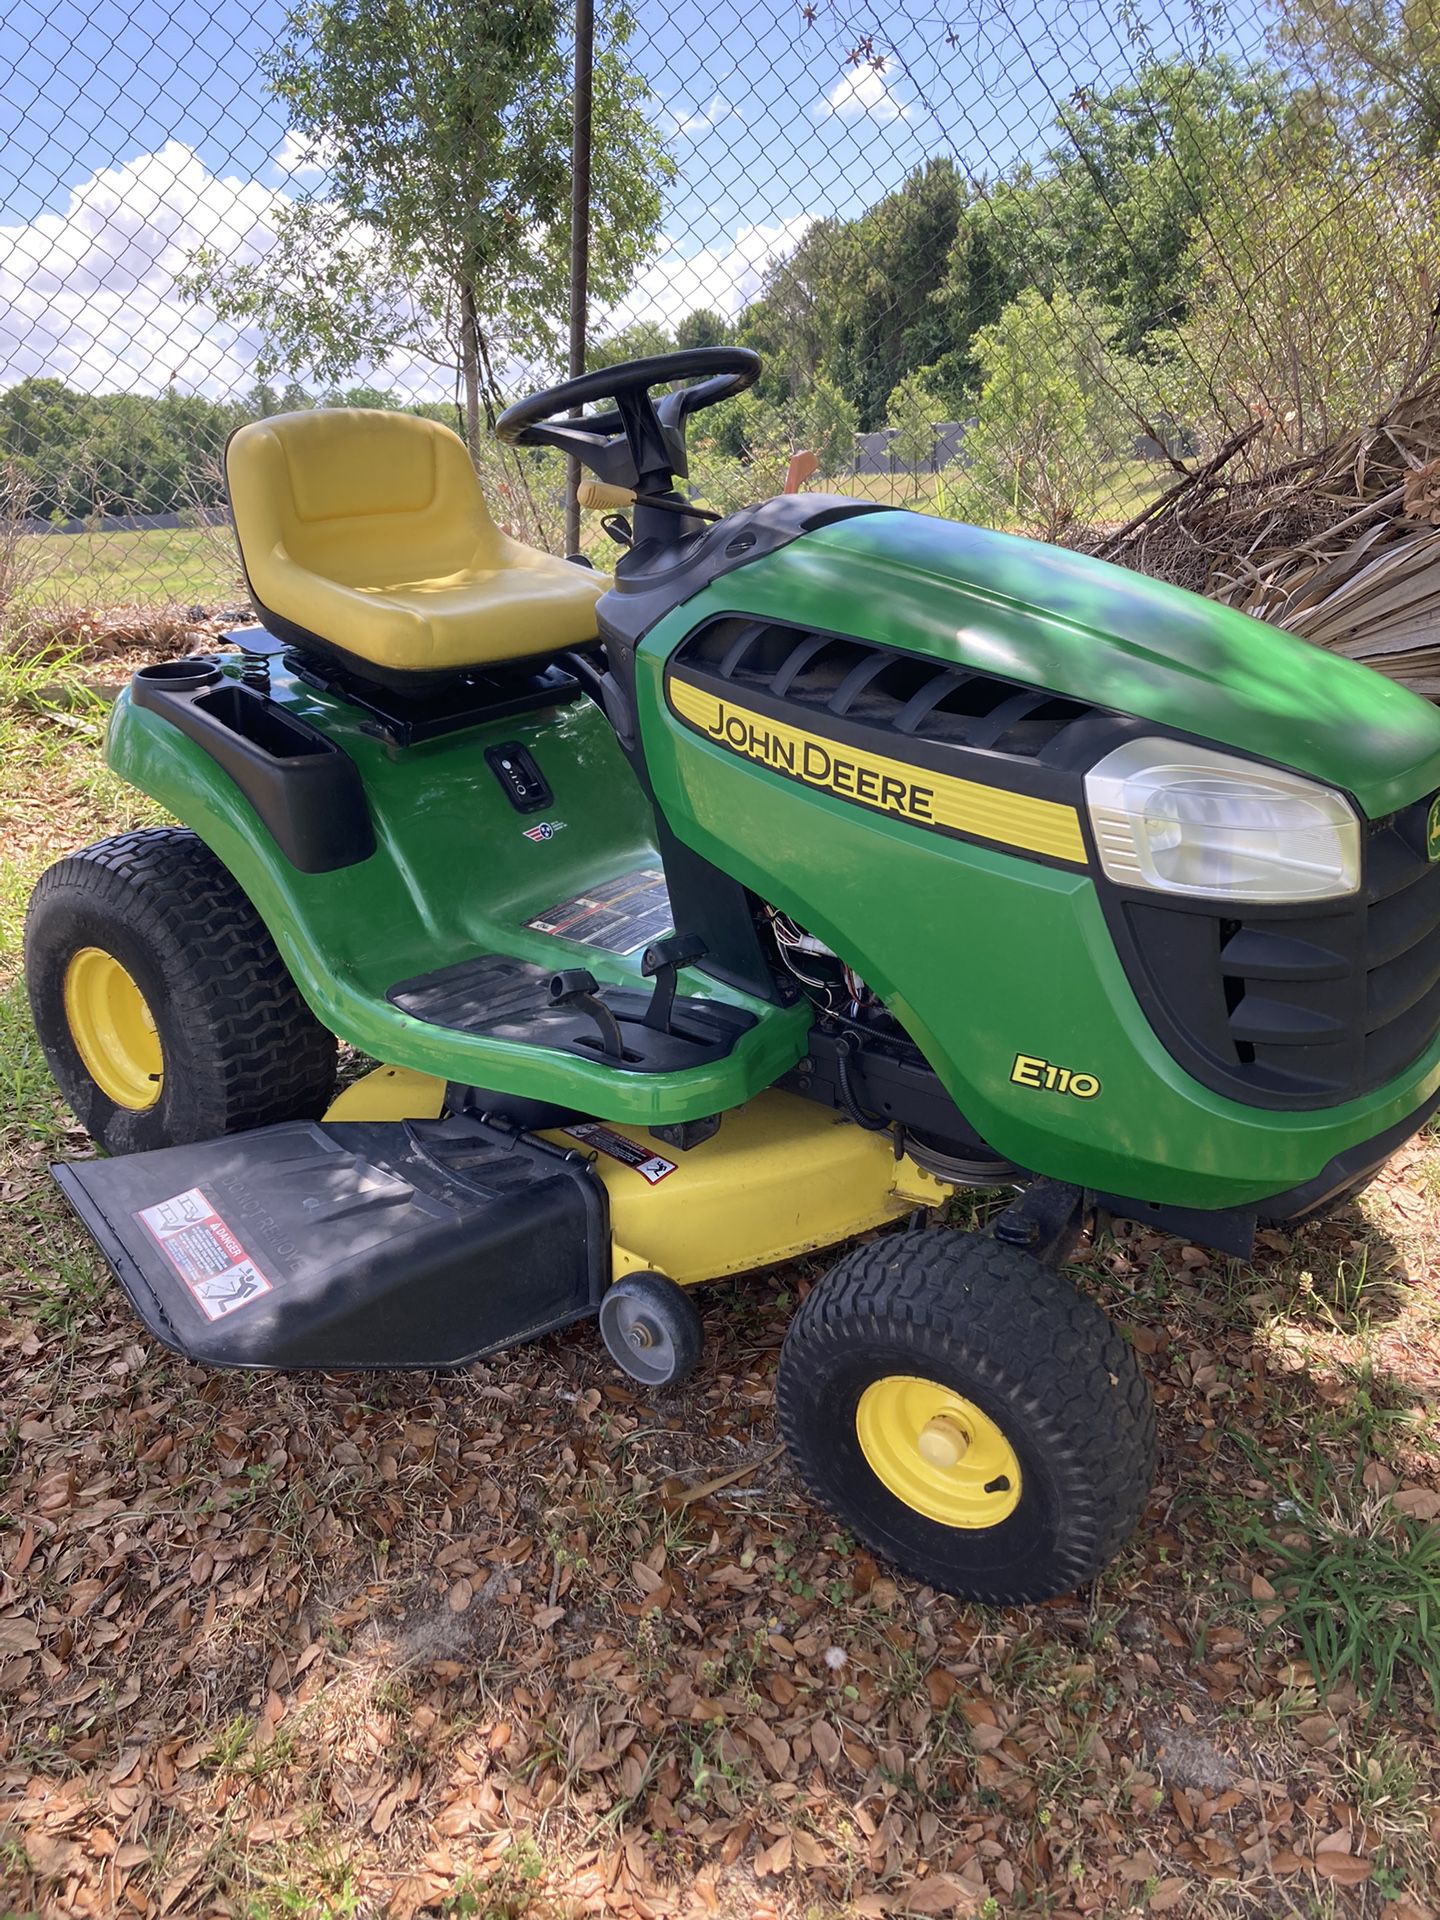 John Deere E110 Tractor 42 Inch Riding Lawn Mower - Only 95 Hours